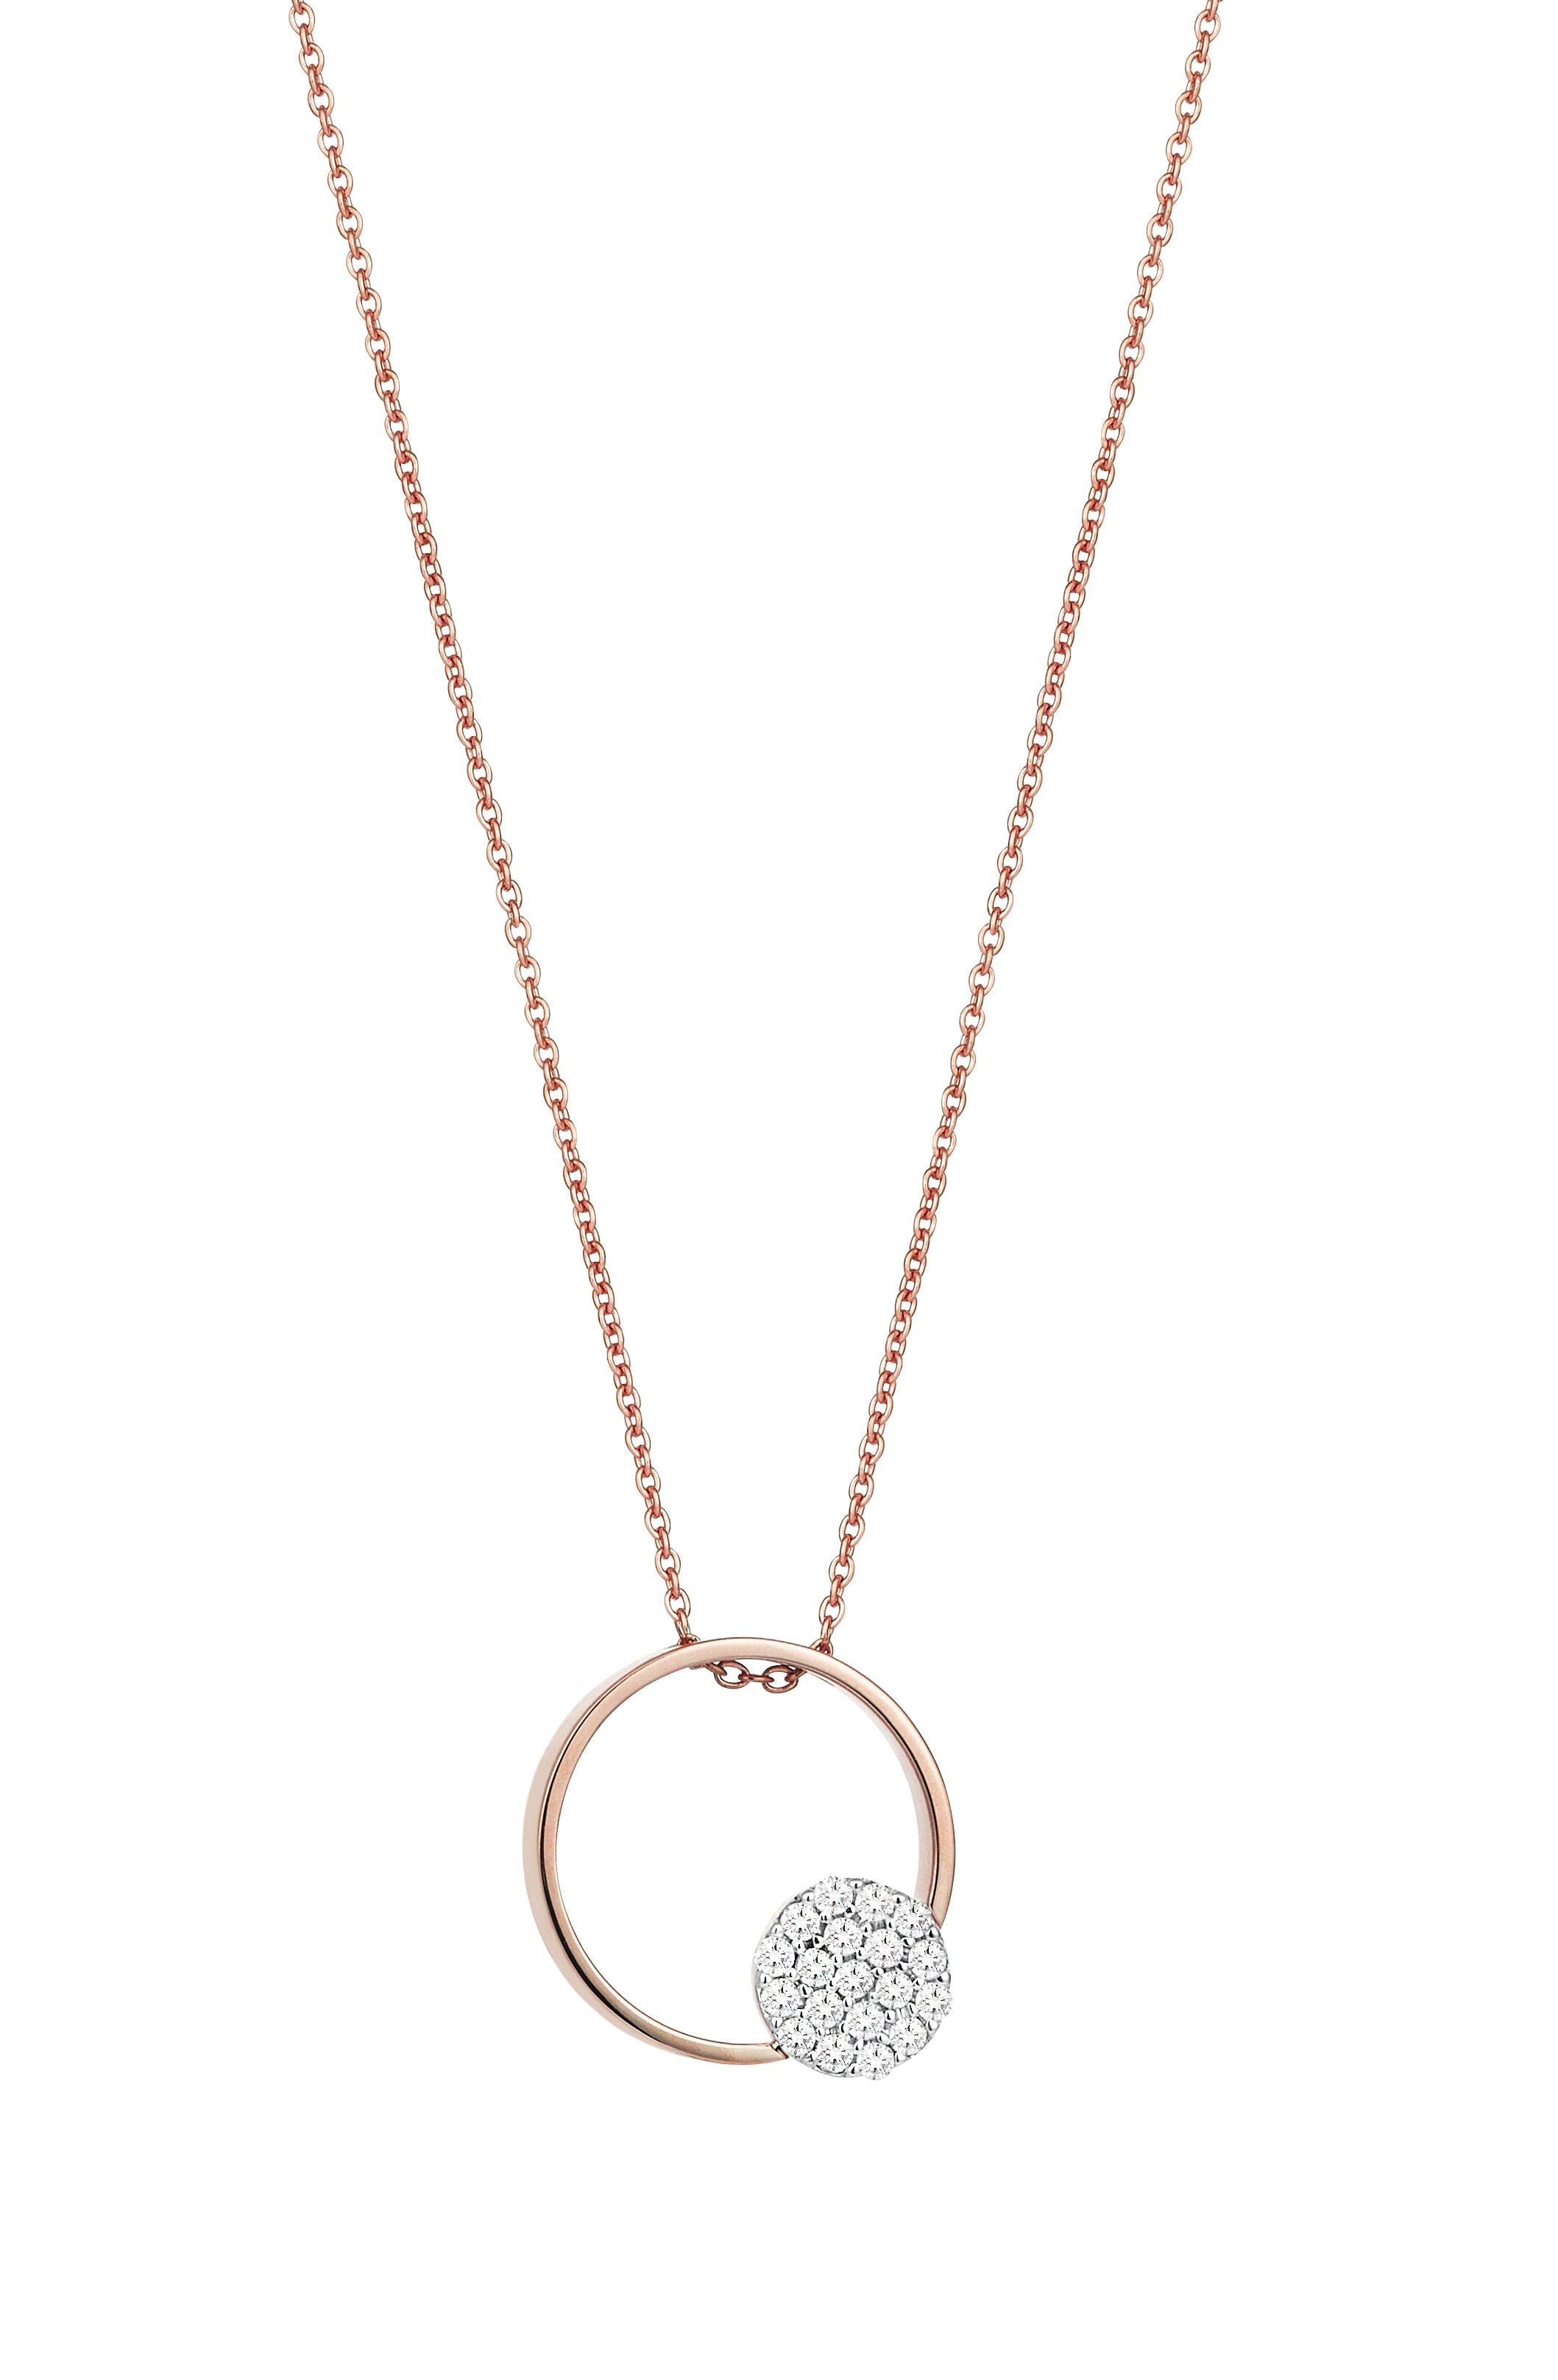 Pave Circular Necklace in Rose Gold - Her Story Shop